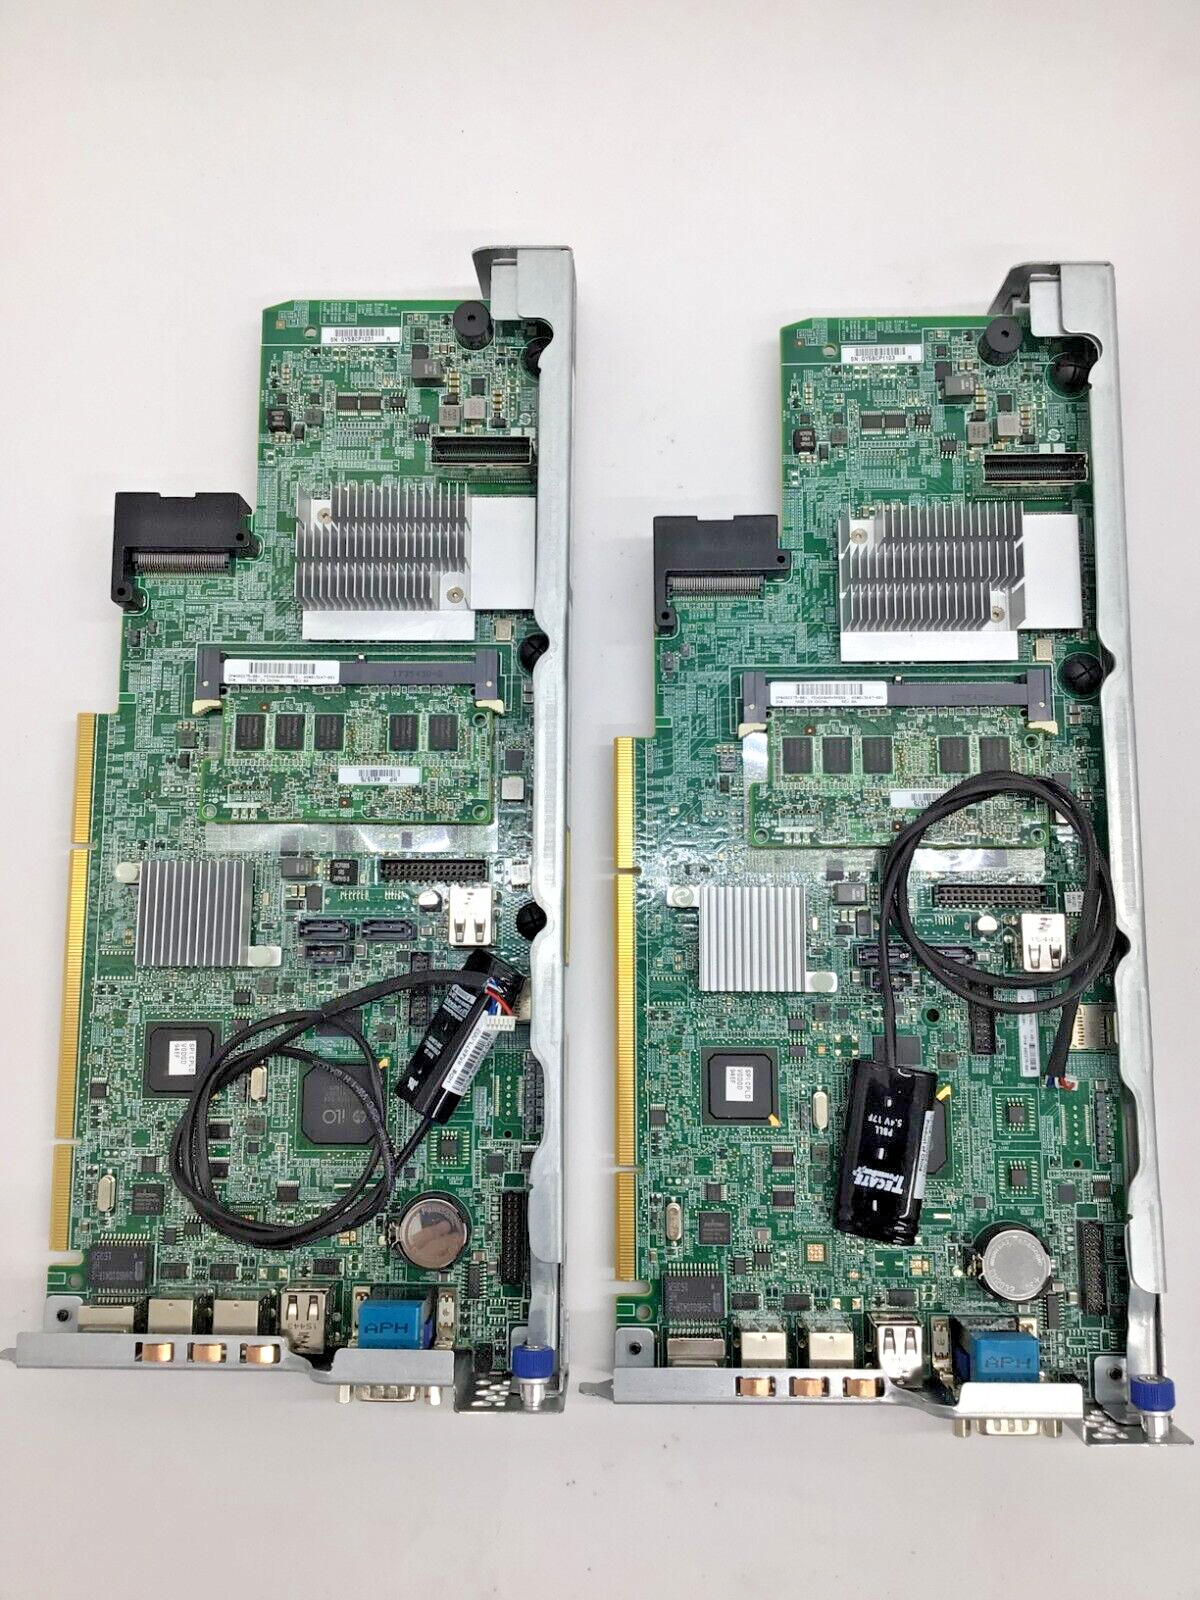 2x HP 802275-001 SYSTEM PERIPHERAL INTERFACE (SPI)